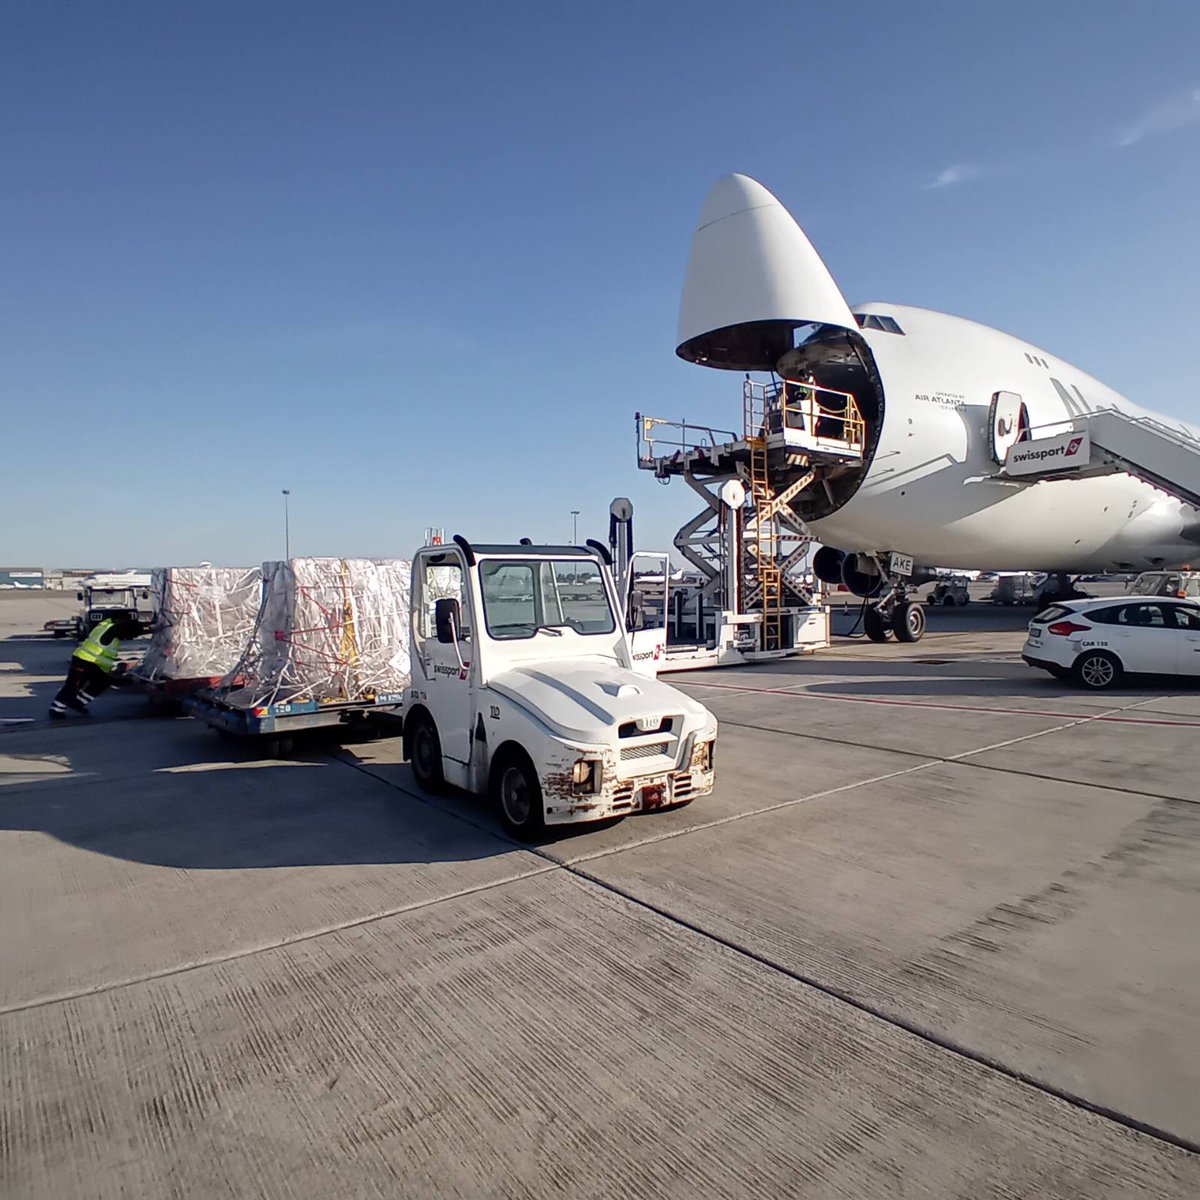 NEW Photos: 100MT of @USAID-supported ready-to-use therapeutic foods just arrived in Cyprus for transport to Gaza. These specialized nutritious foods will be sent through the maritime corridor to help treat more than 7,200 cases of severe wasting in children across Gaza.